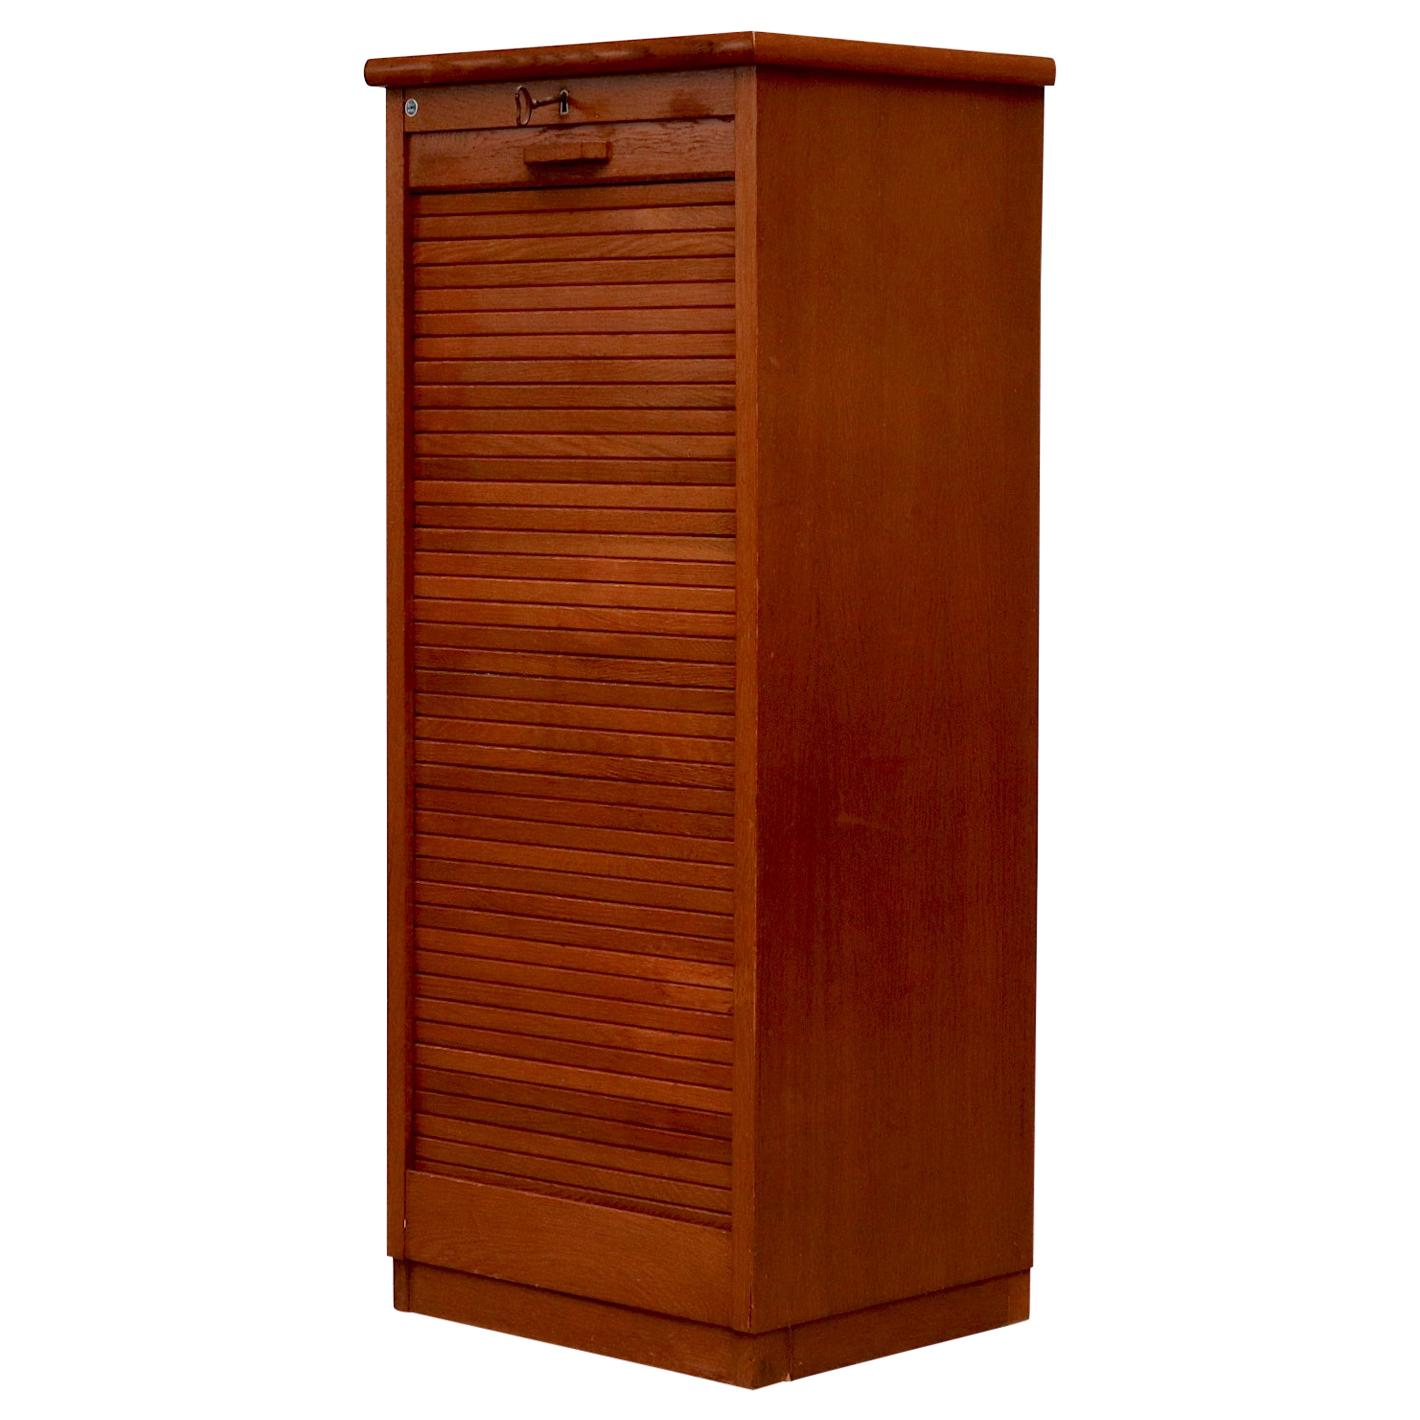 Tall Oak Eeka File Cabinet with Tambourd Door and Record Storage